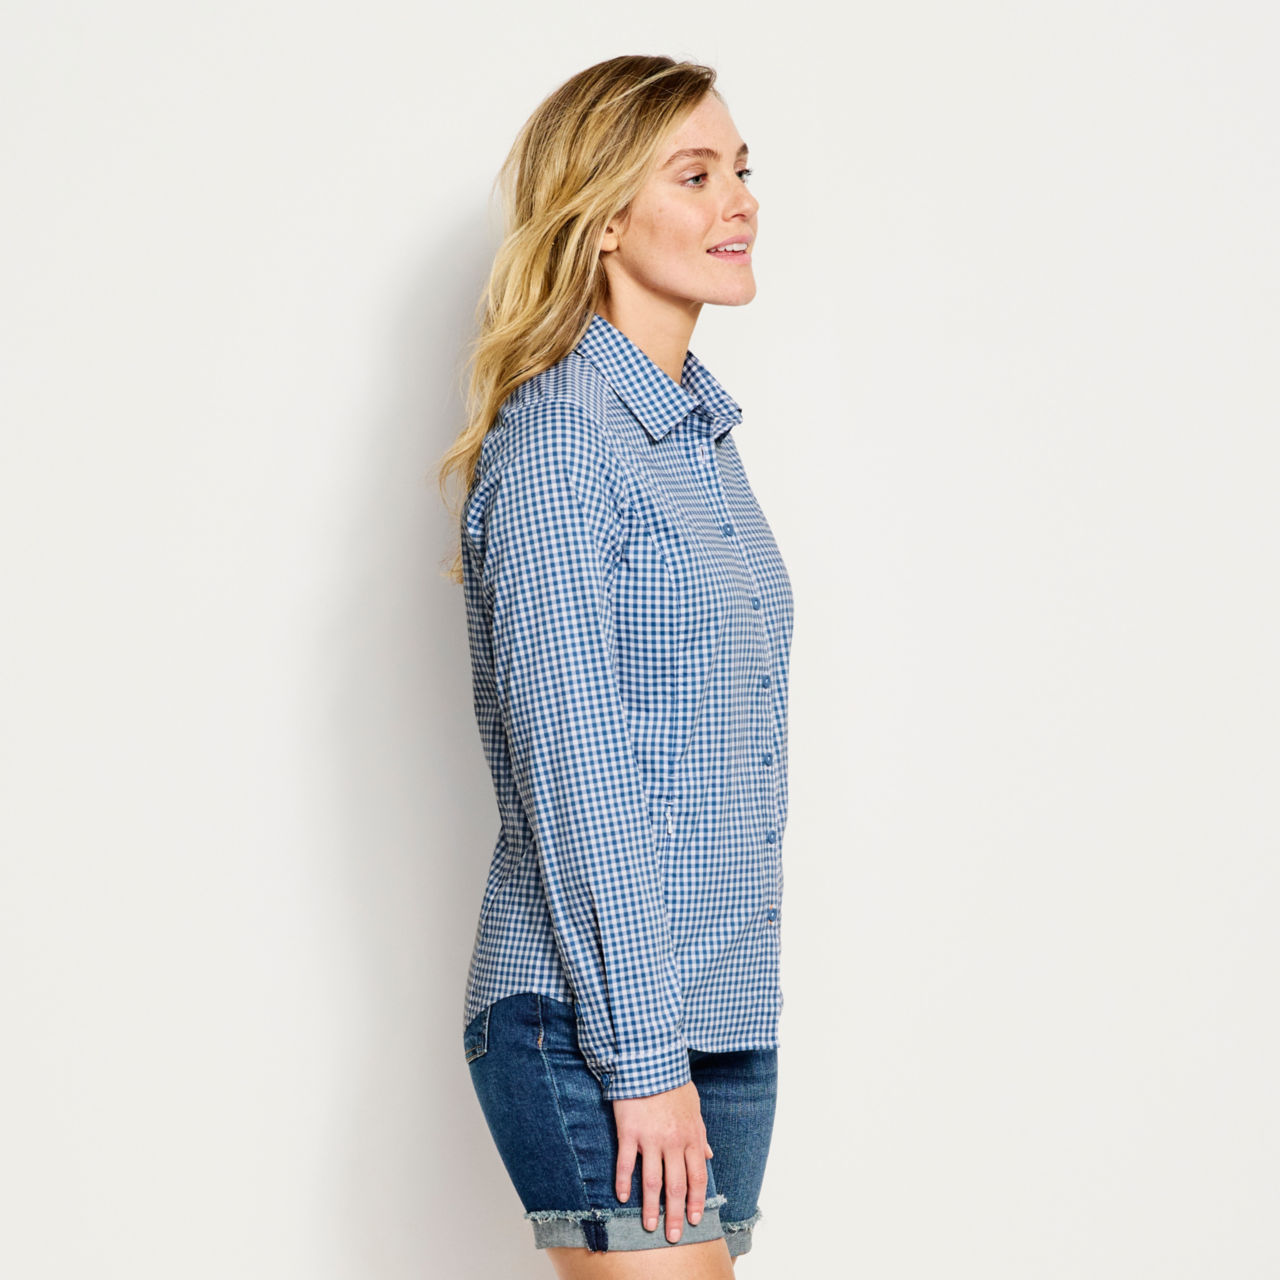 Women's River Guide Long-Sleeved Shirt - DUSTY BLUE CHECK image number 1